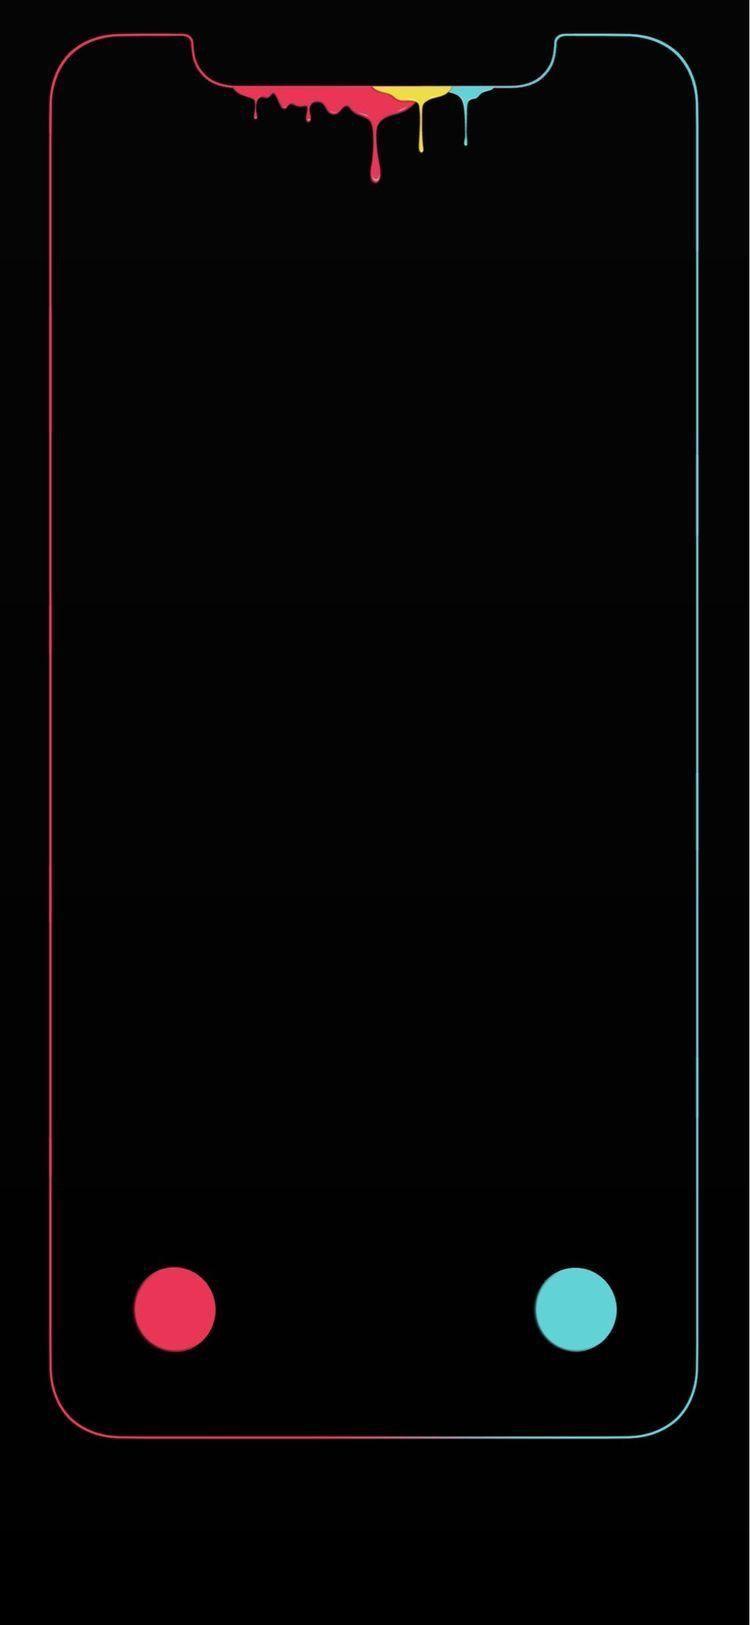 iPhone X Notch Wallpapers - Wallpaper Cave